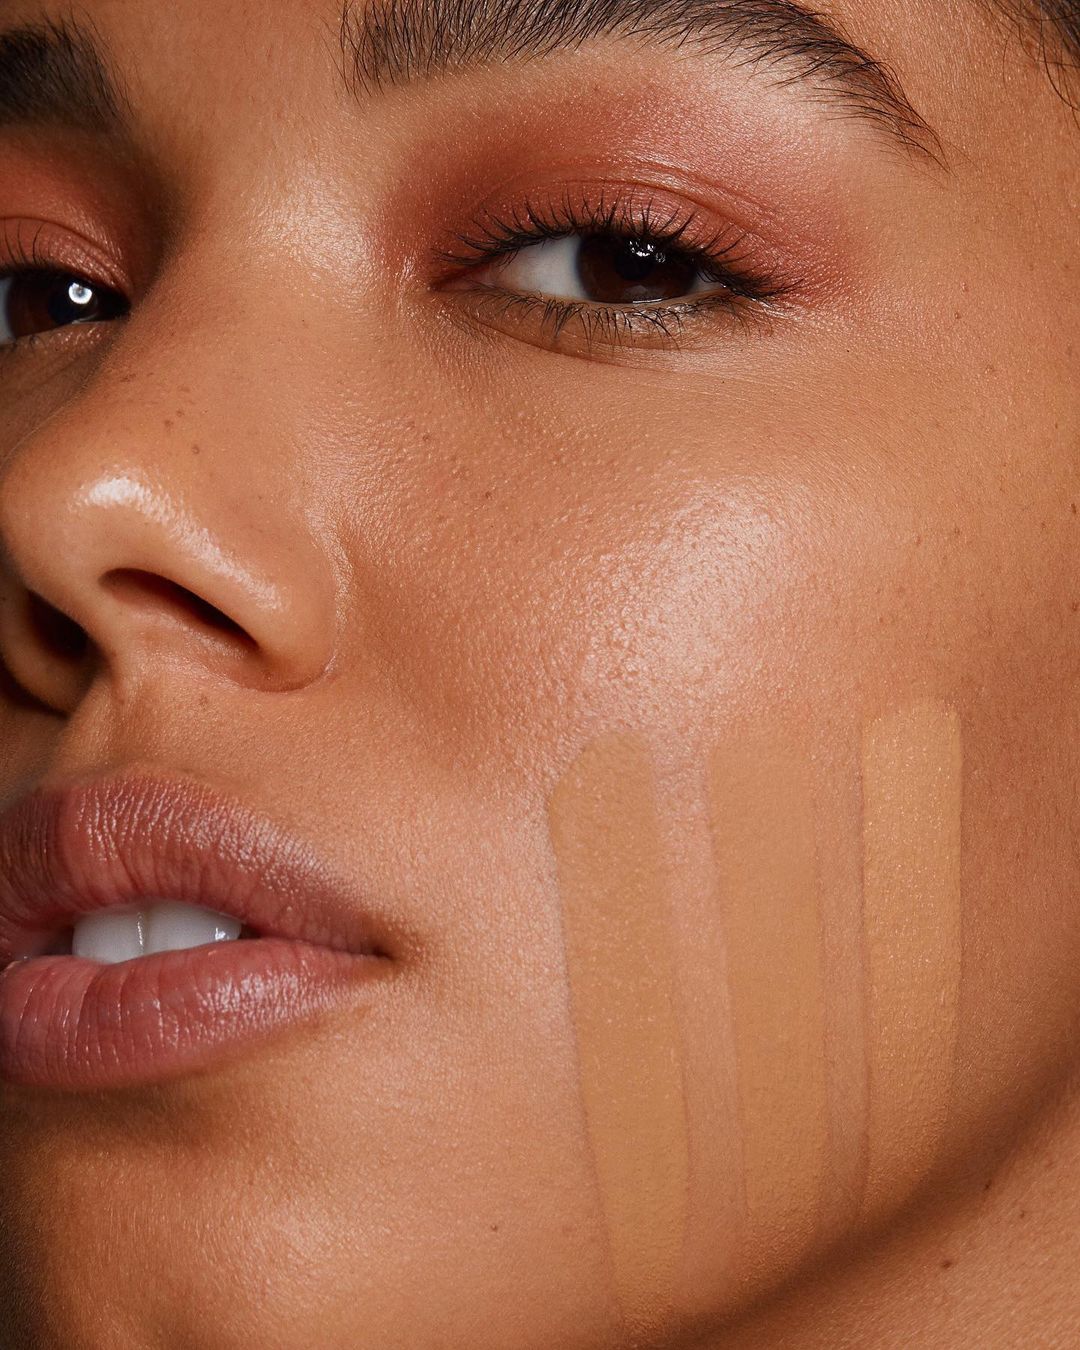 NARS Cosmetics - Decisions, decisions. How to choose your next NARS foundation >>
 
NEW Soft Matte Complete Foundation (left): full coverage; soft matte finish; 16-hour wear

Natural Radiant Longwear...